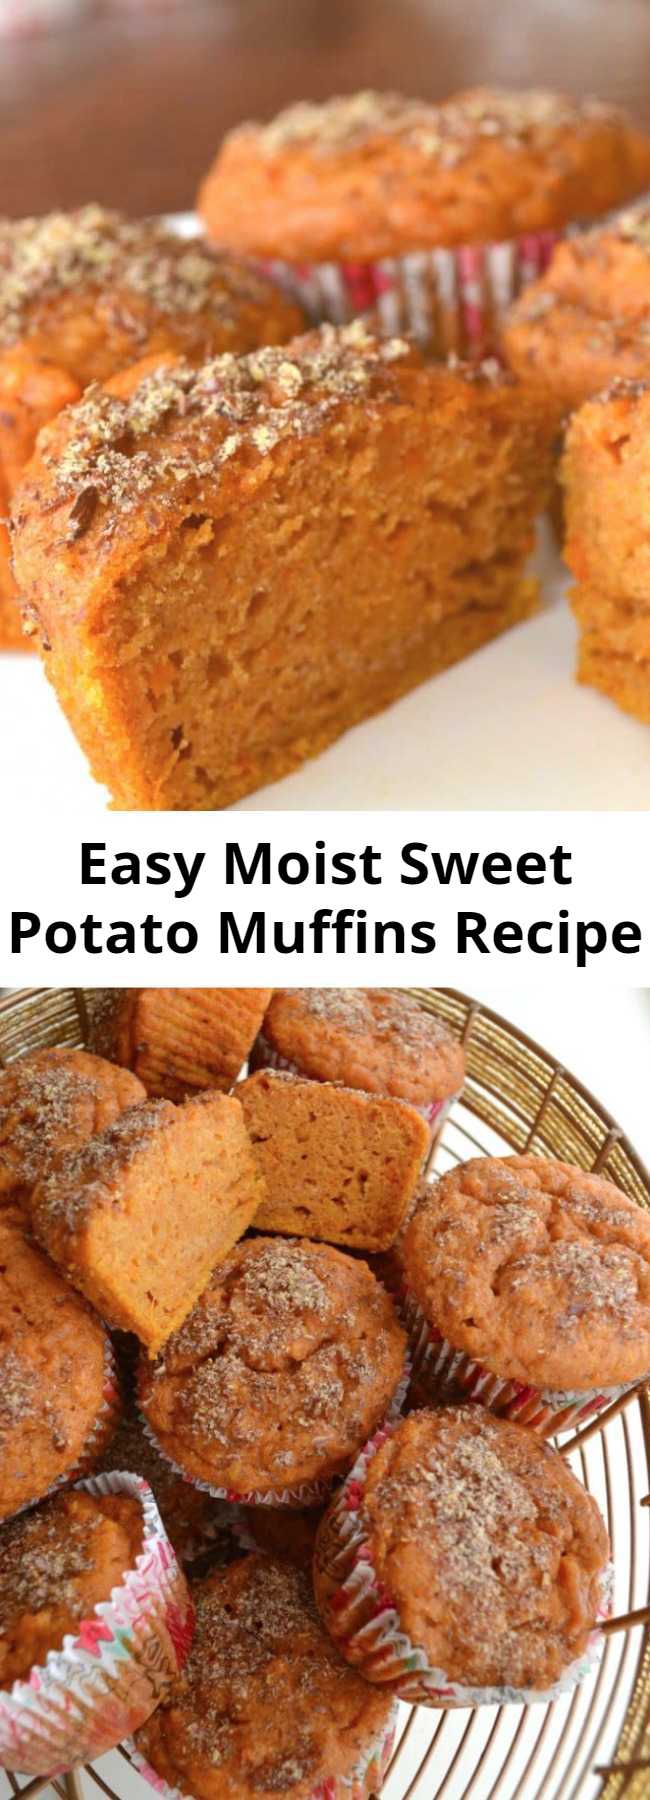 Easy Moist Sweet Potato Muffins Recipe - These sweet potato muffins are extremely moist, packed with nutrients, and DELICIOUS! You can feel good about feeding them to your family for breakfast or for a snack.